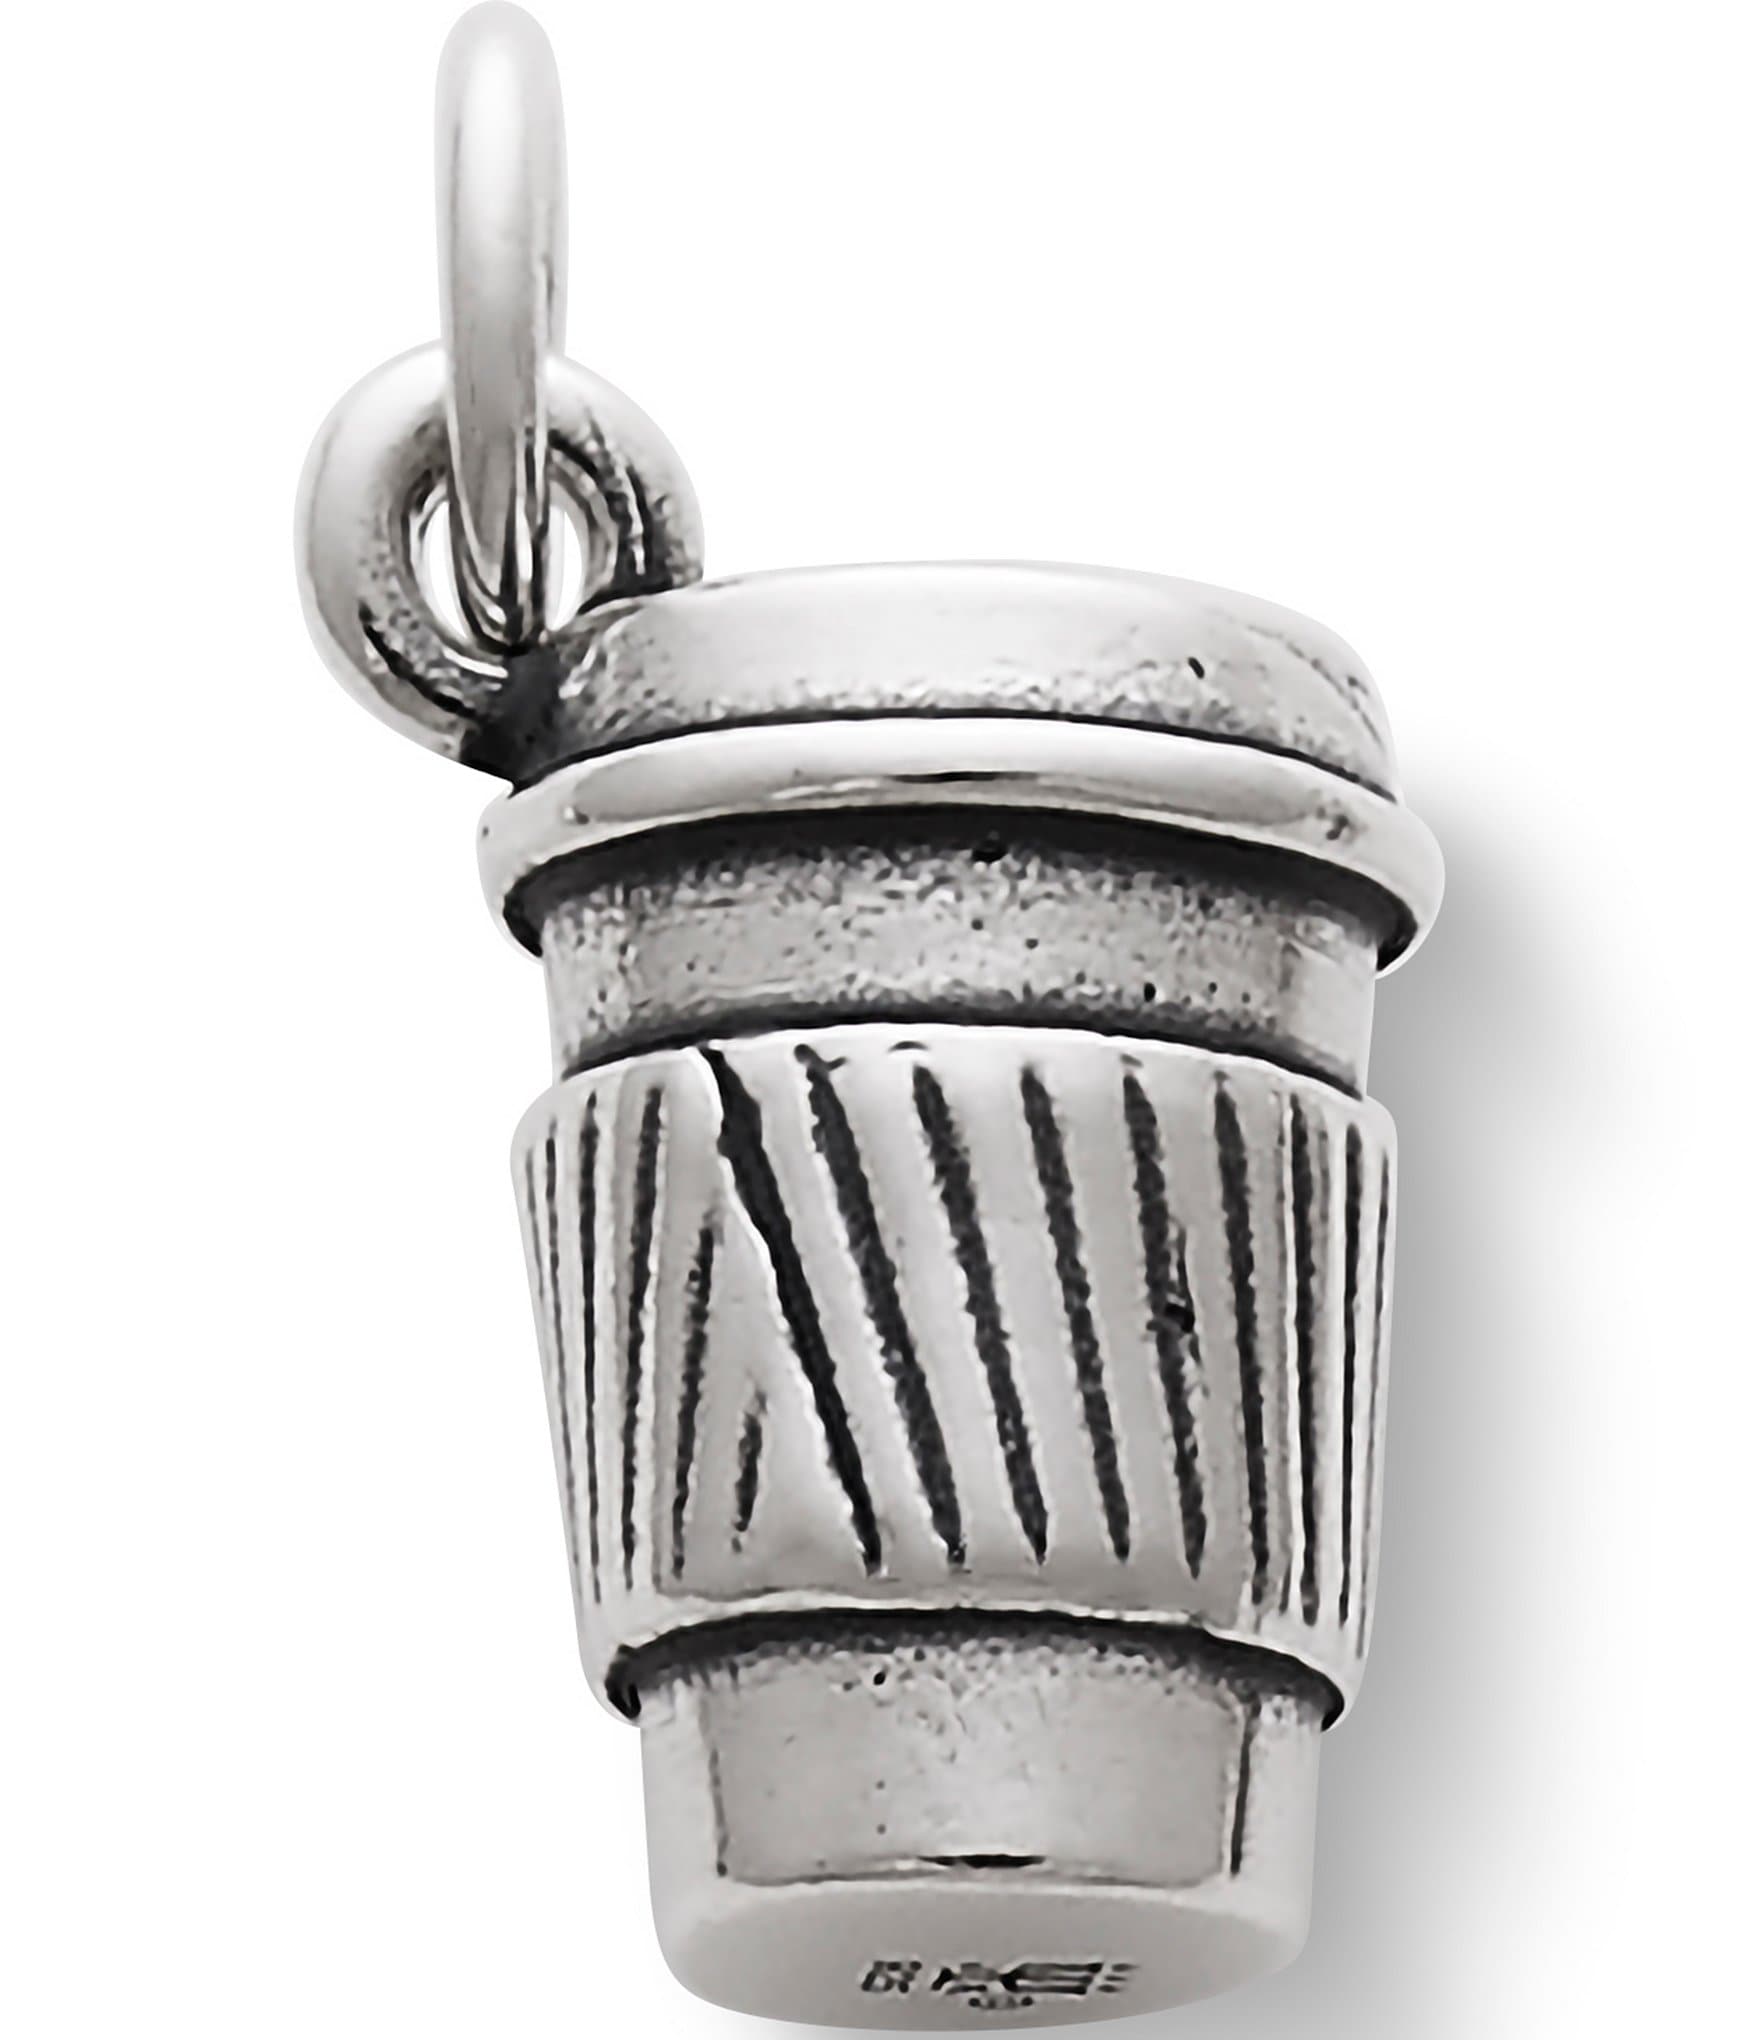 https://dimg.dillards.com/is/image/DillardsZoom/zoom/james-avery-coffee-to-go-sterling-silver-charm/00000001_zi_sterling_silver04366280.jpg